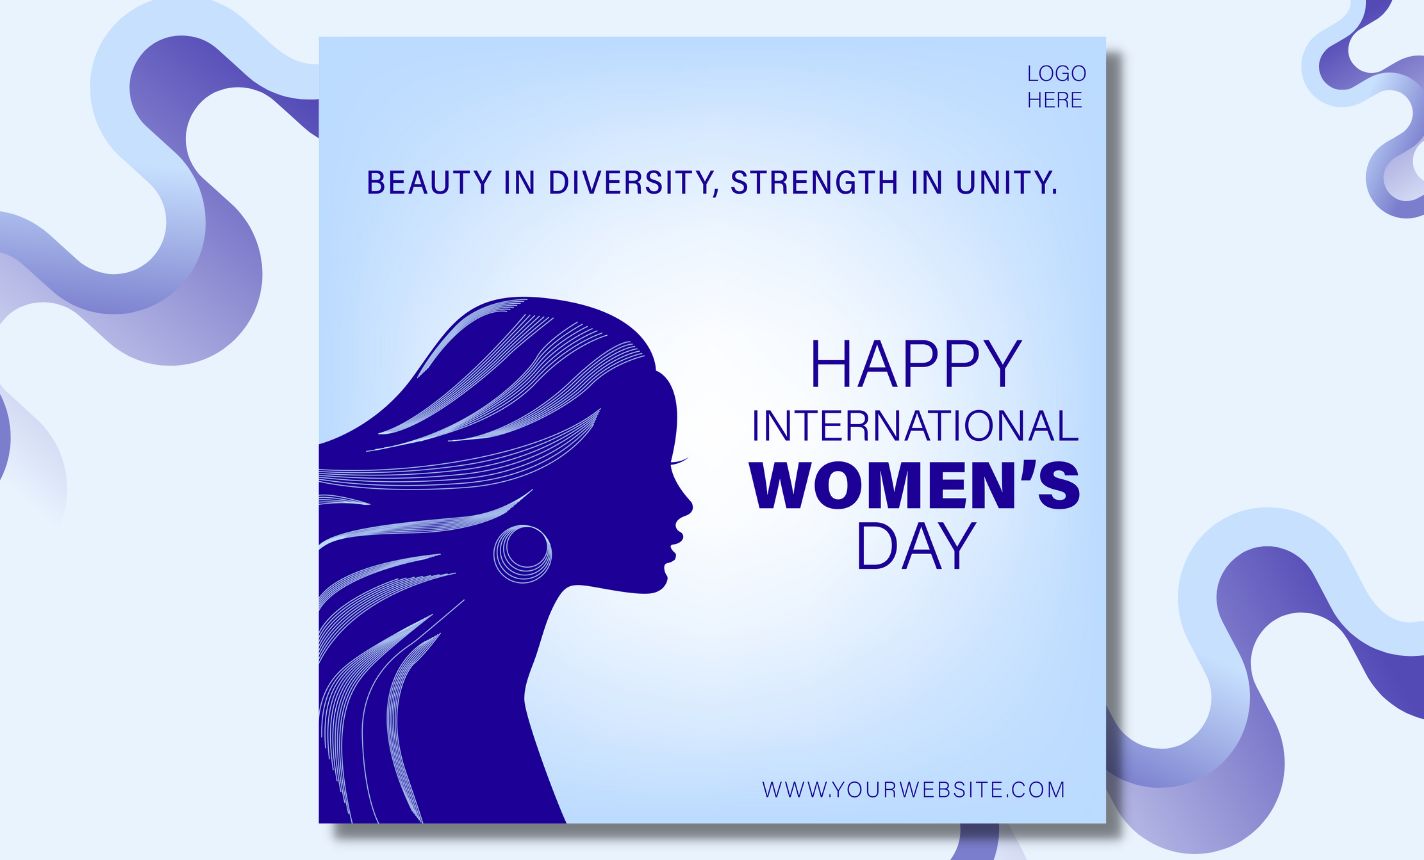 Women's day poster with a woman's profile.